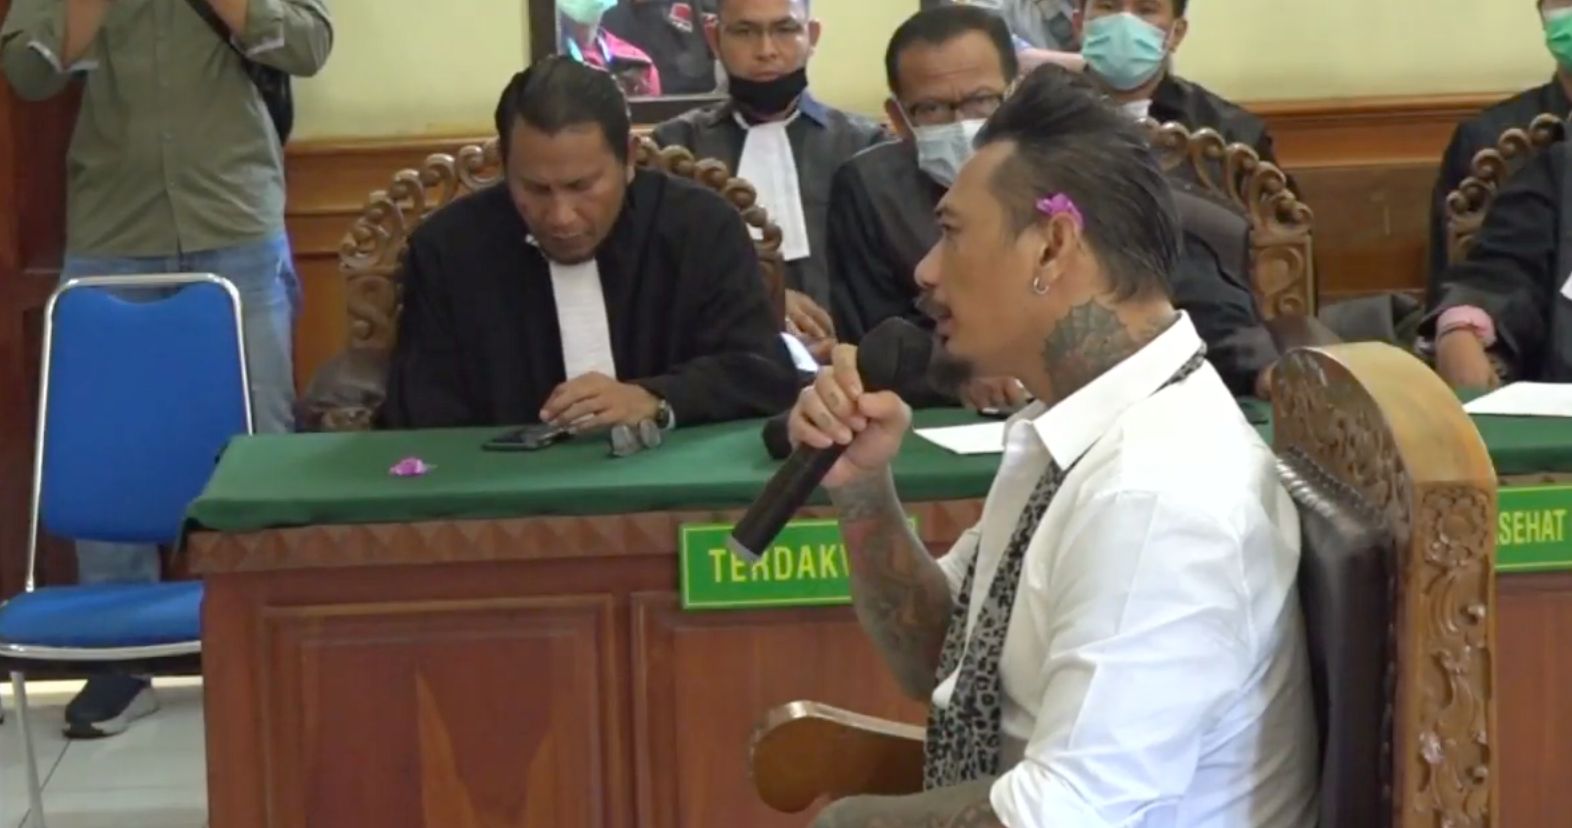 Jerinx speaking to the Denpasar Court on Nov. 19, 2020 after his sentencing. Screengrab: Youtube